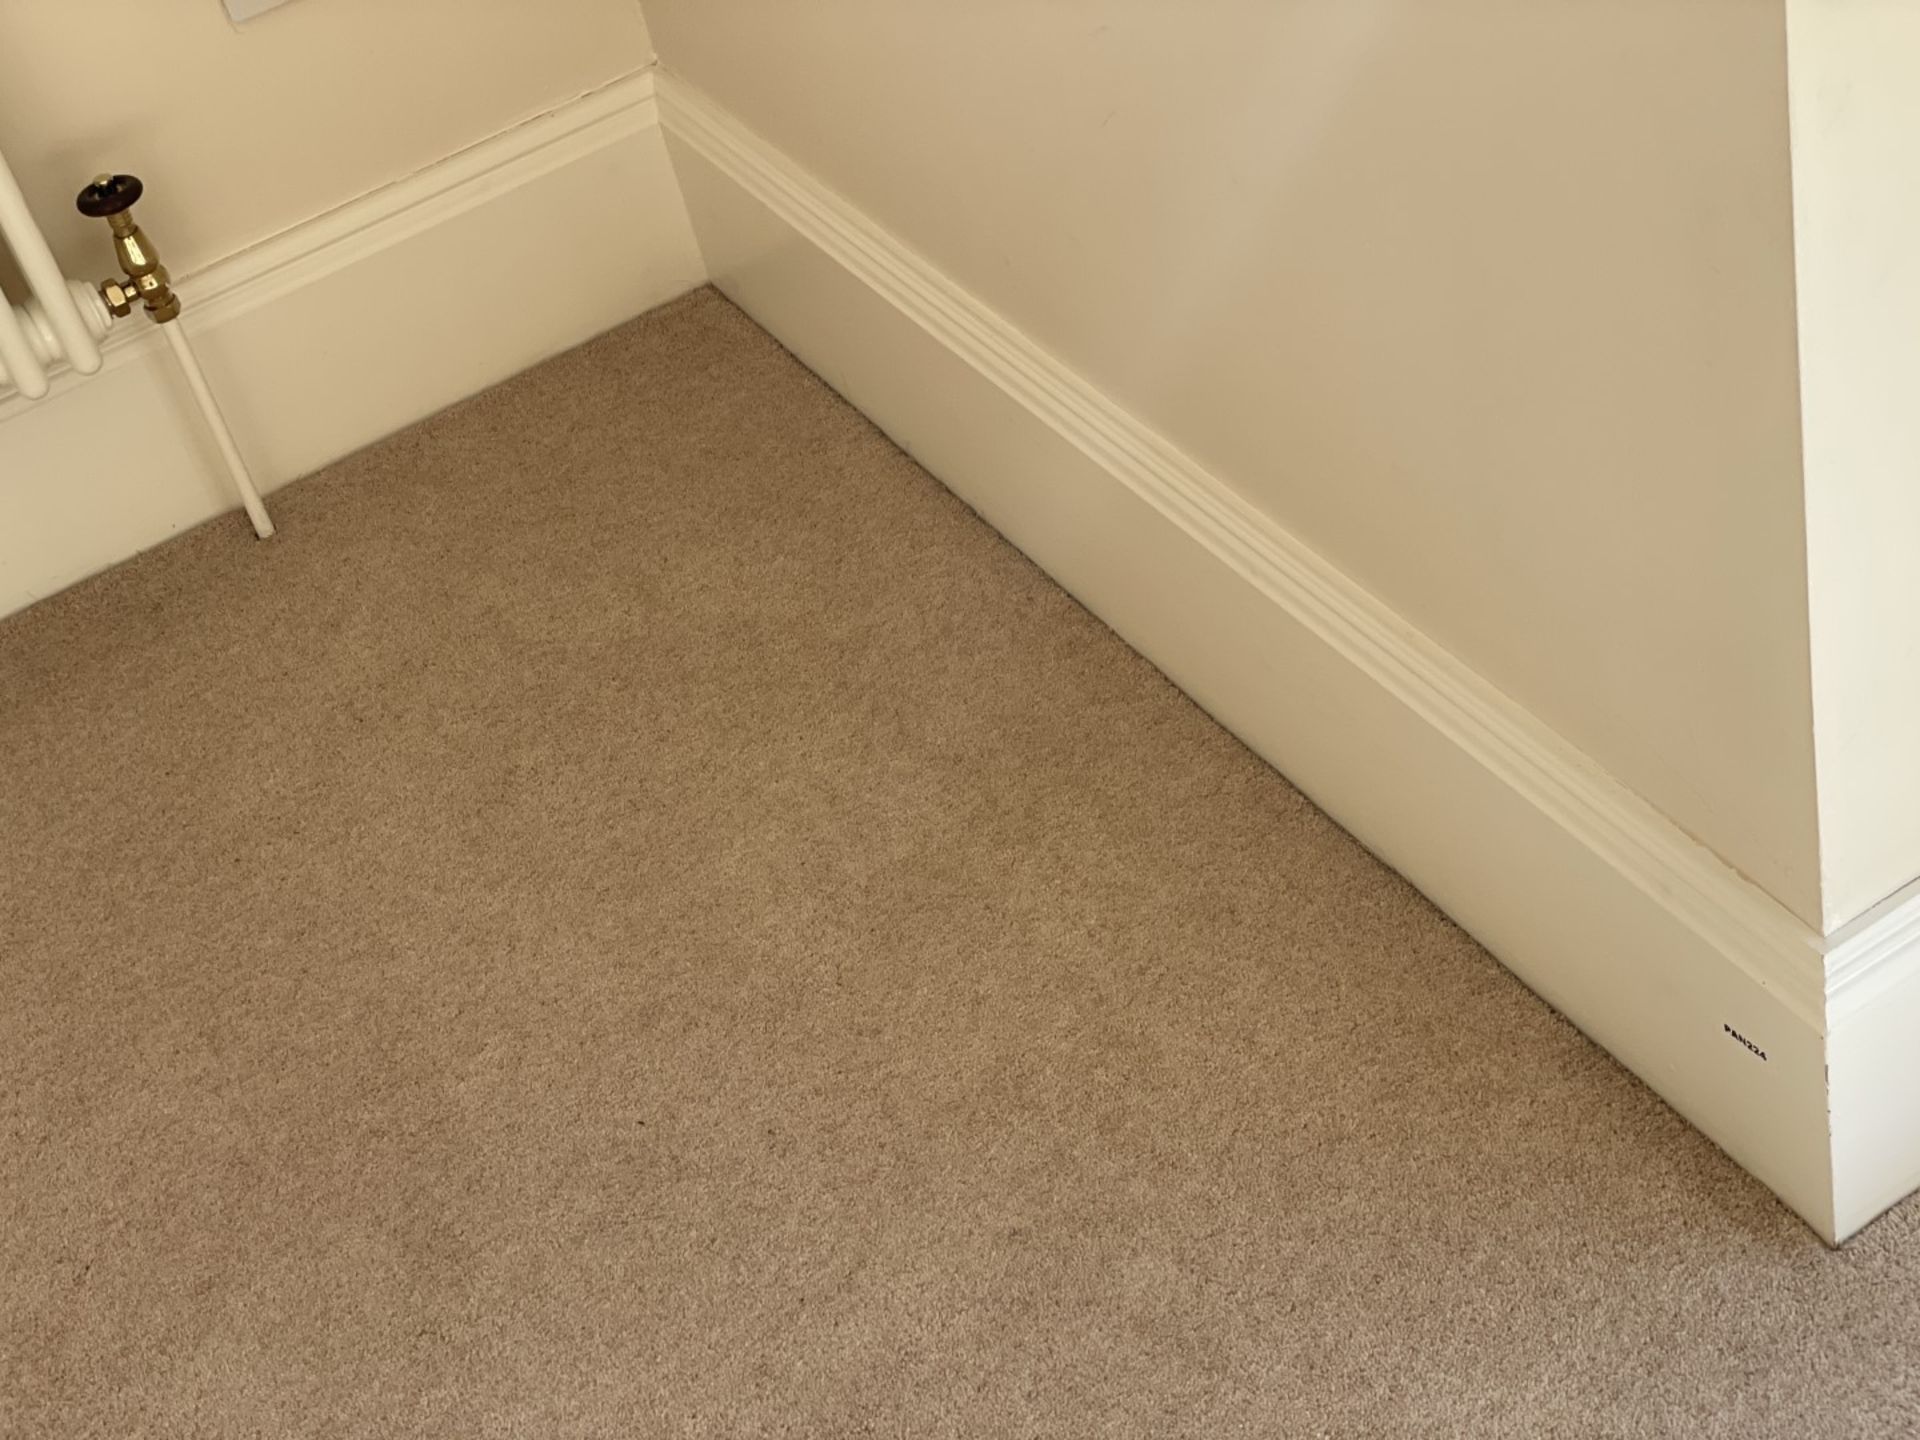 1 x Approximately 22-Metres of Painted Timber Wooden Skirting Boards, In White - Ref: PAN224 - CL896 - Image 3 of 10